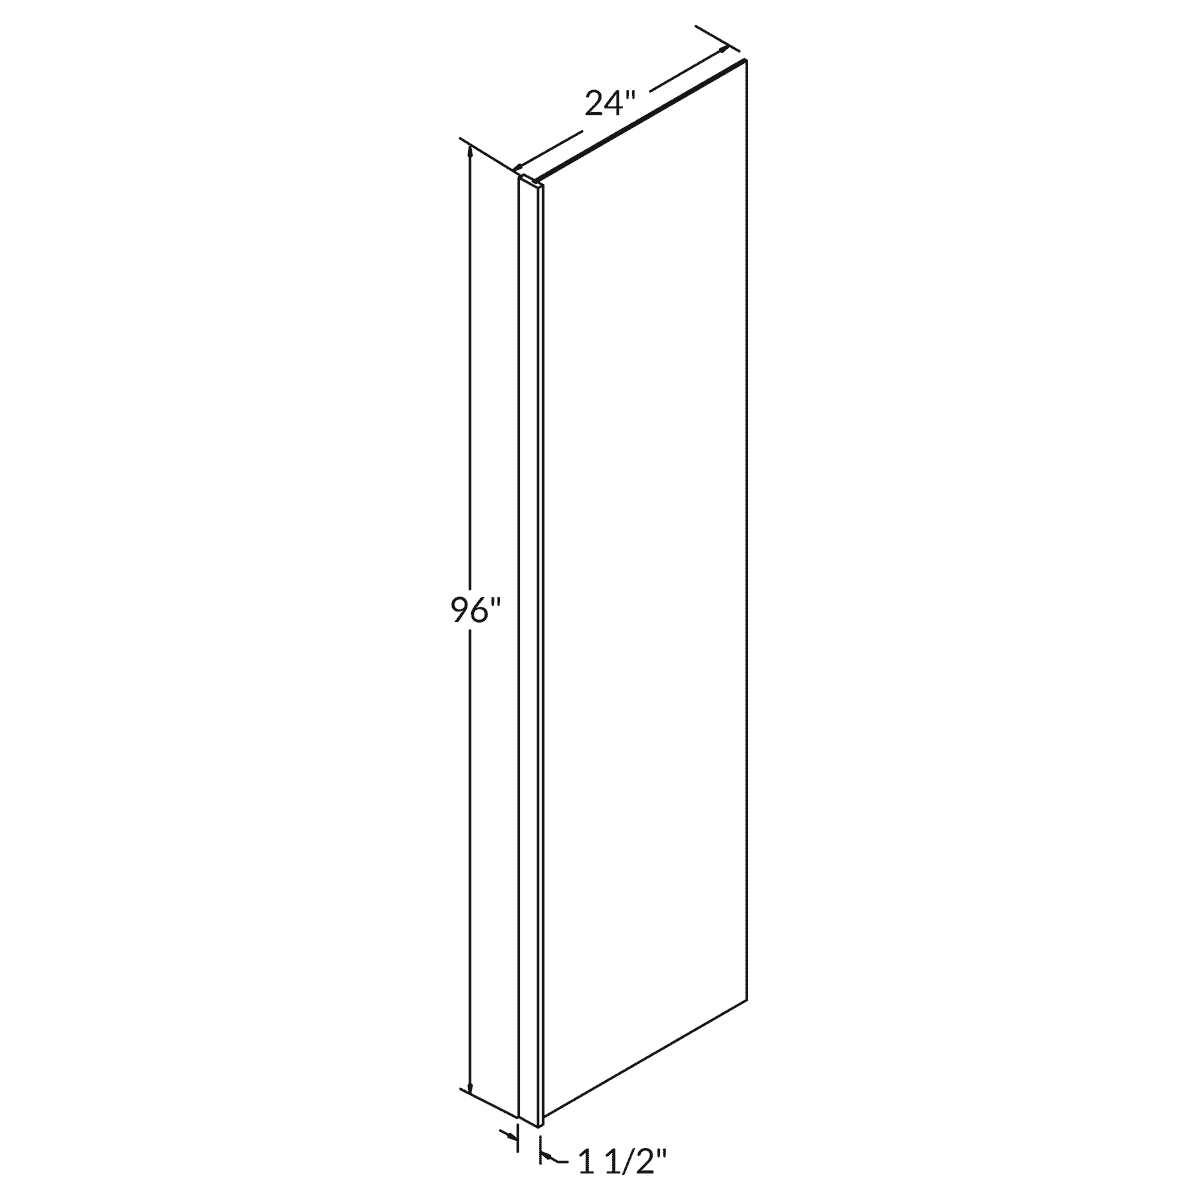 96 H X 24 D End Panel With 1 1 2 Stile For Maple Shaker Cabinetry